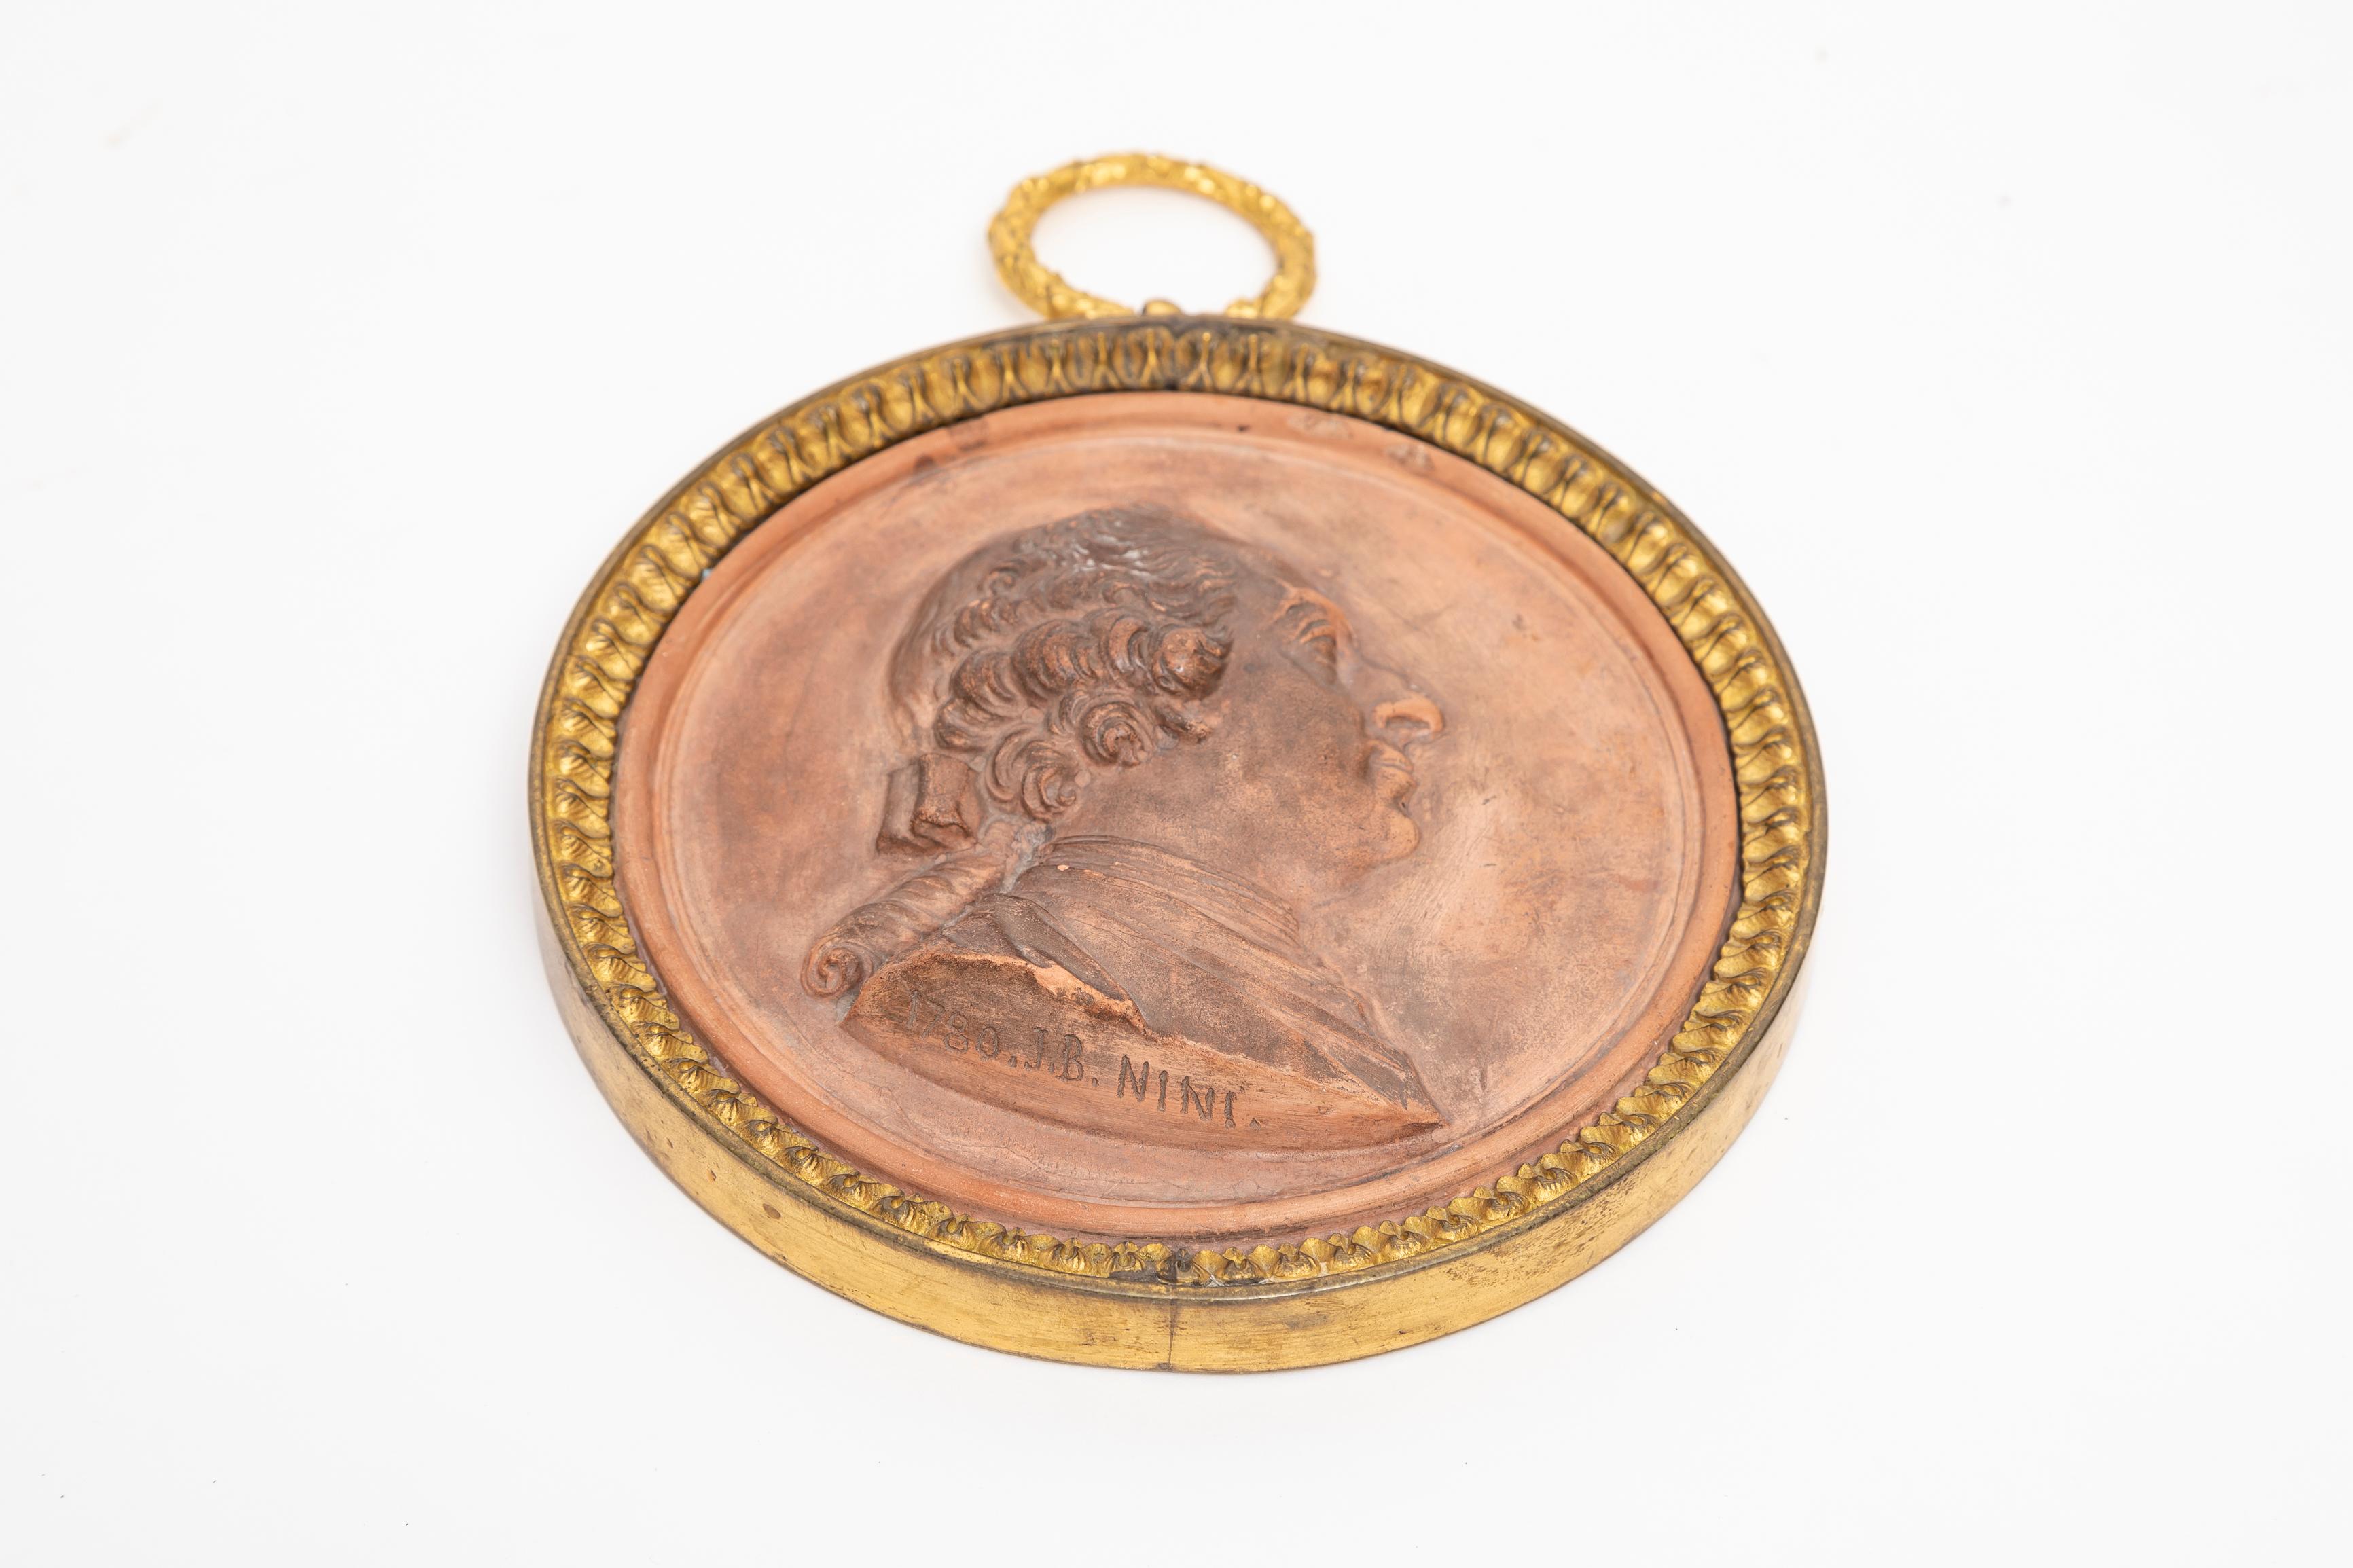 Dore Bronze Mounted King Louis XVI Terracotta Portrait Plaque by Jean-Baptiste Nini, 1780

This remarkable and historically significant antique terracotta portrait plaque bears the signature of the artist, Jean-Baptiste Nini, renowned for his